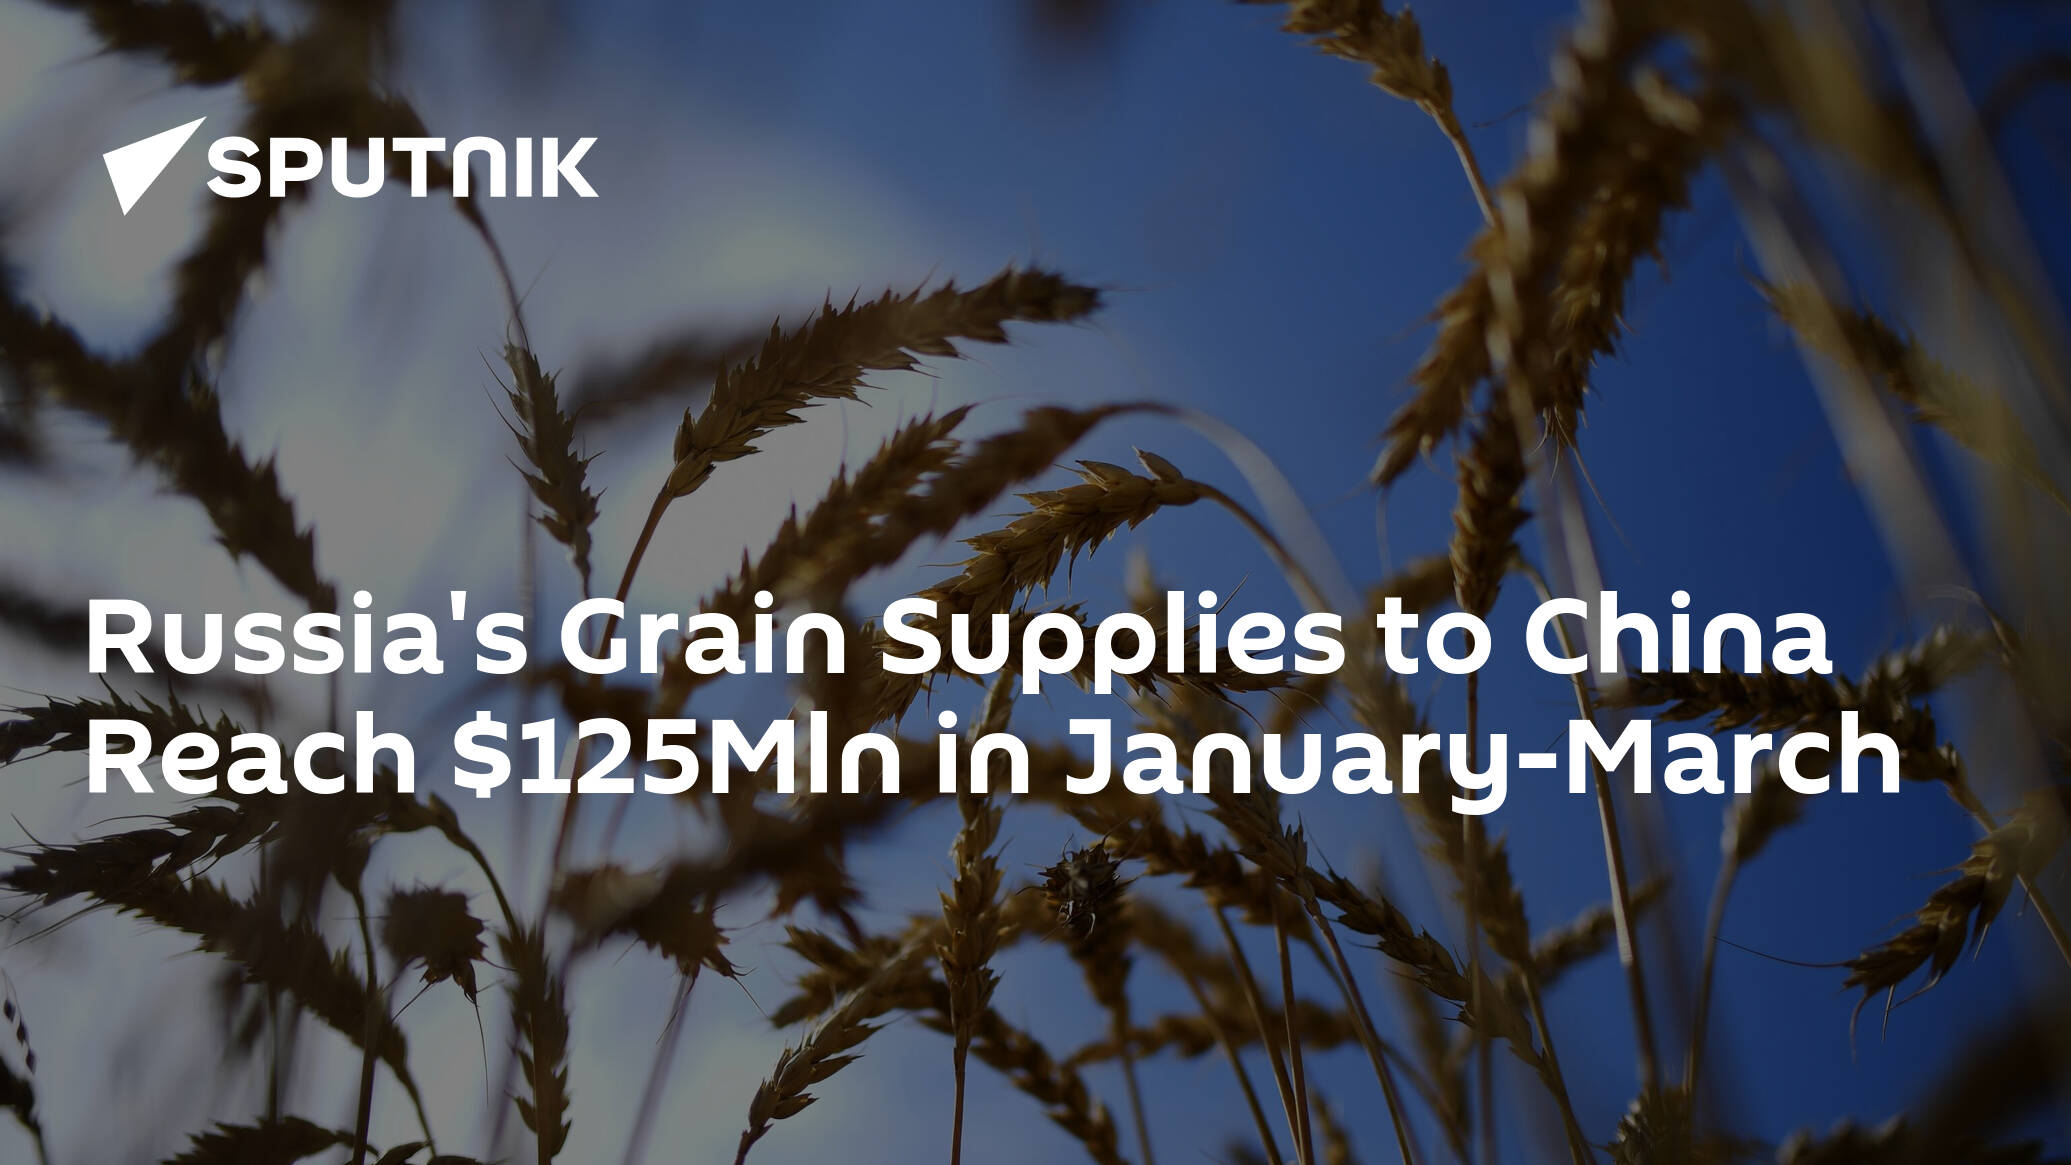 Russia's Grain Supplies to China Reach 5Mln in January-March